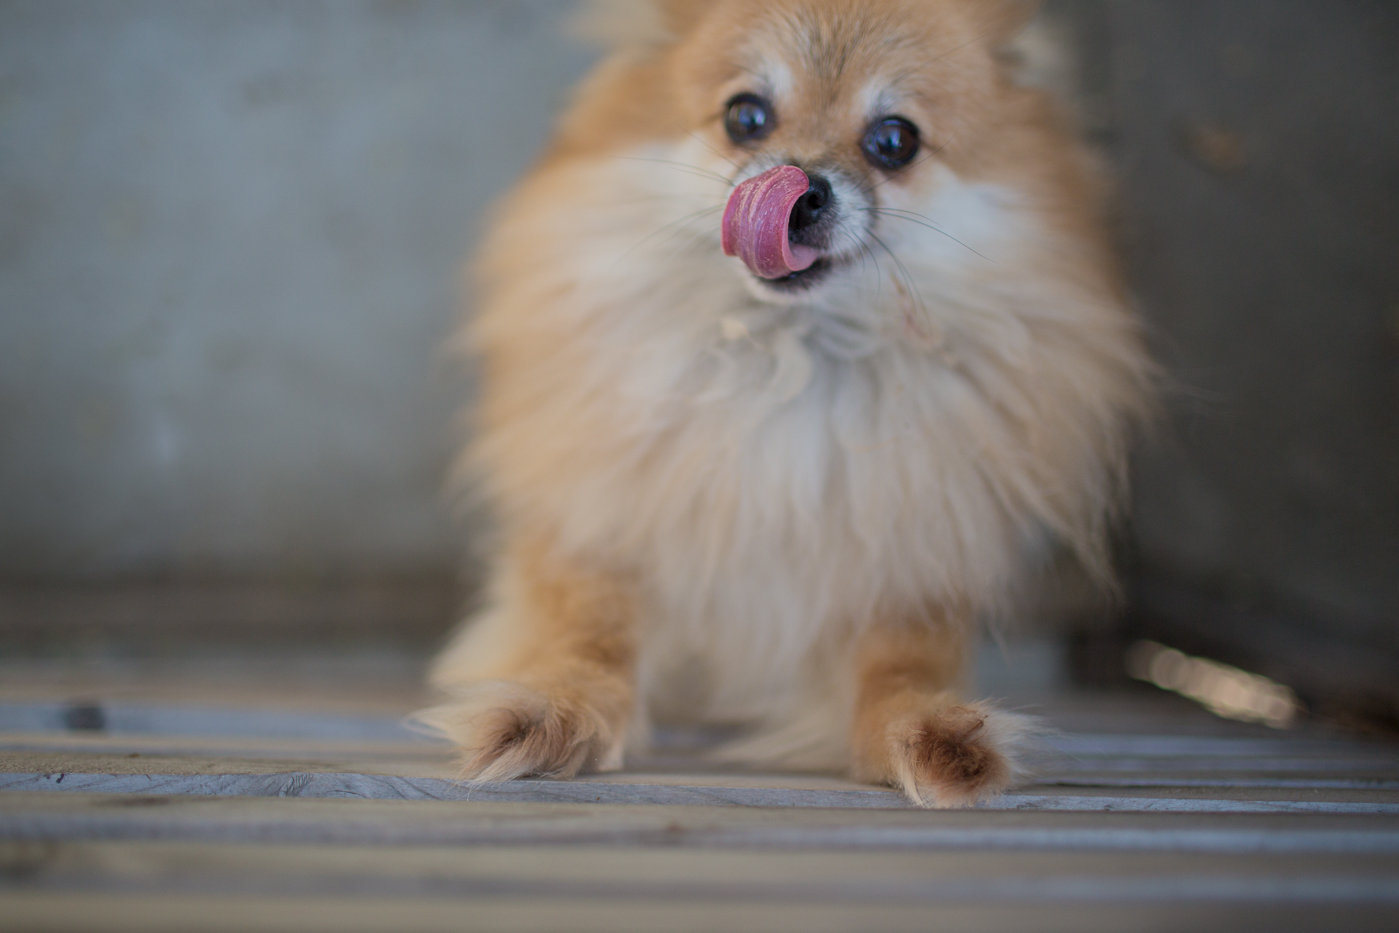 Pomeranian licking lips, part of our 2015 year in review at www.hejdoll.com